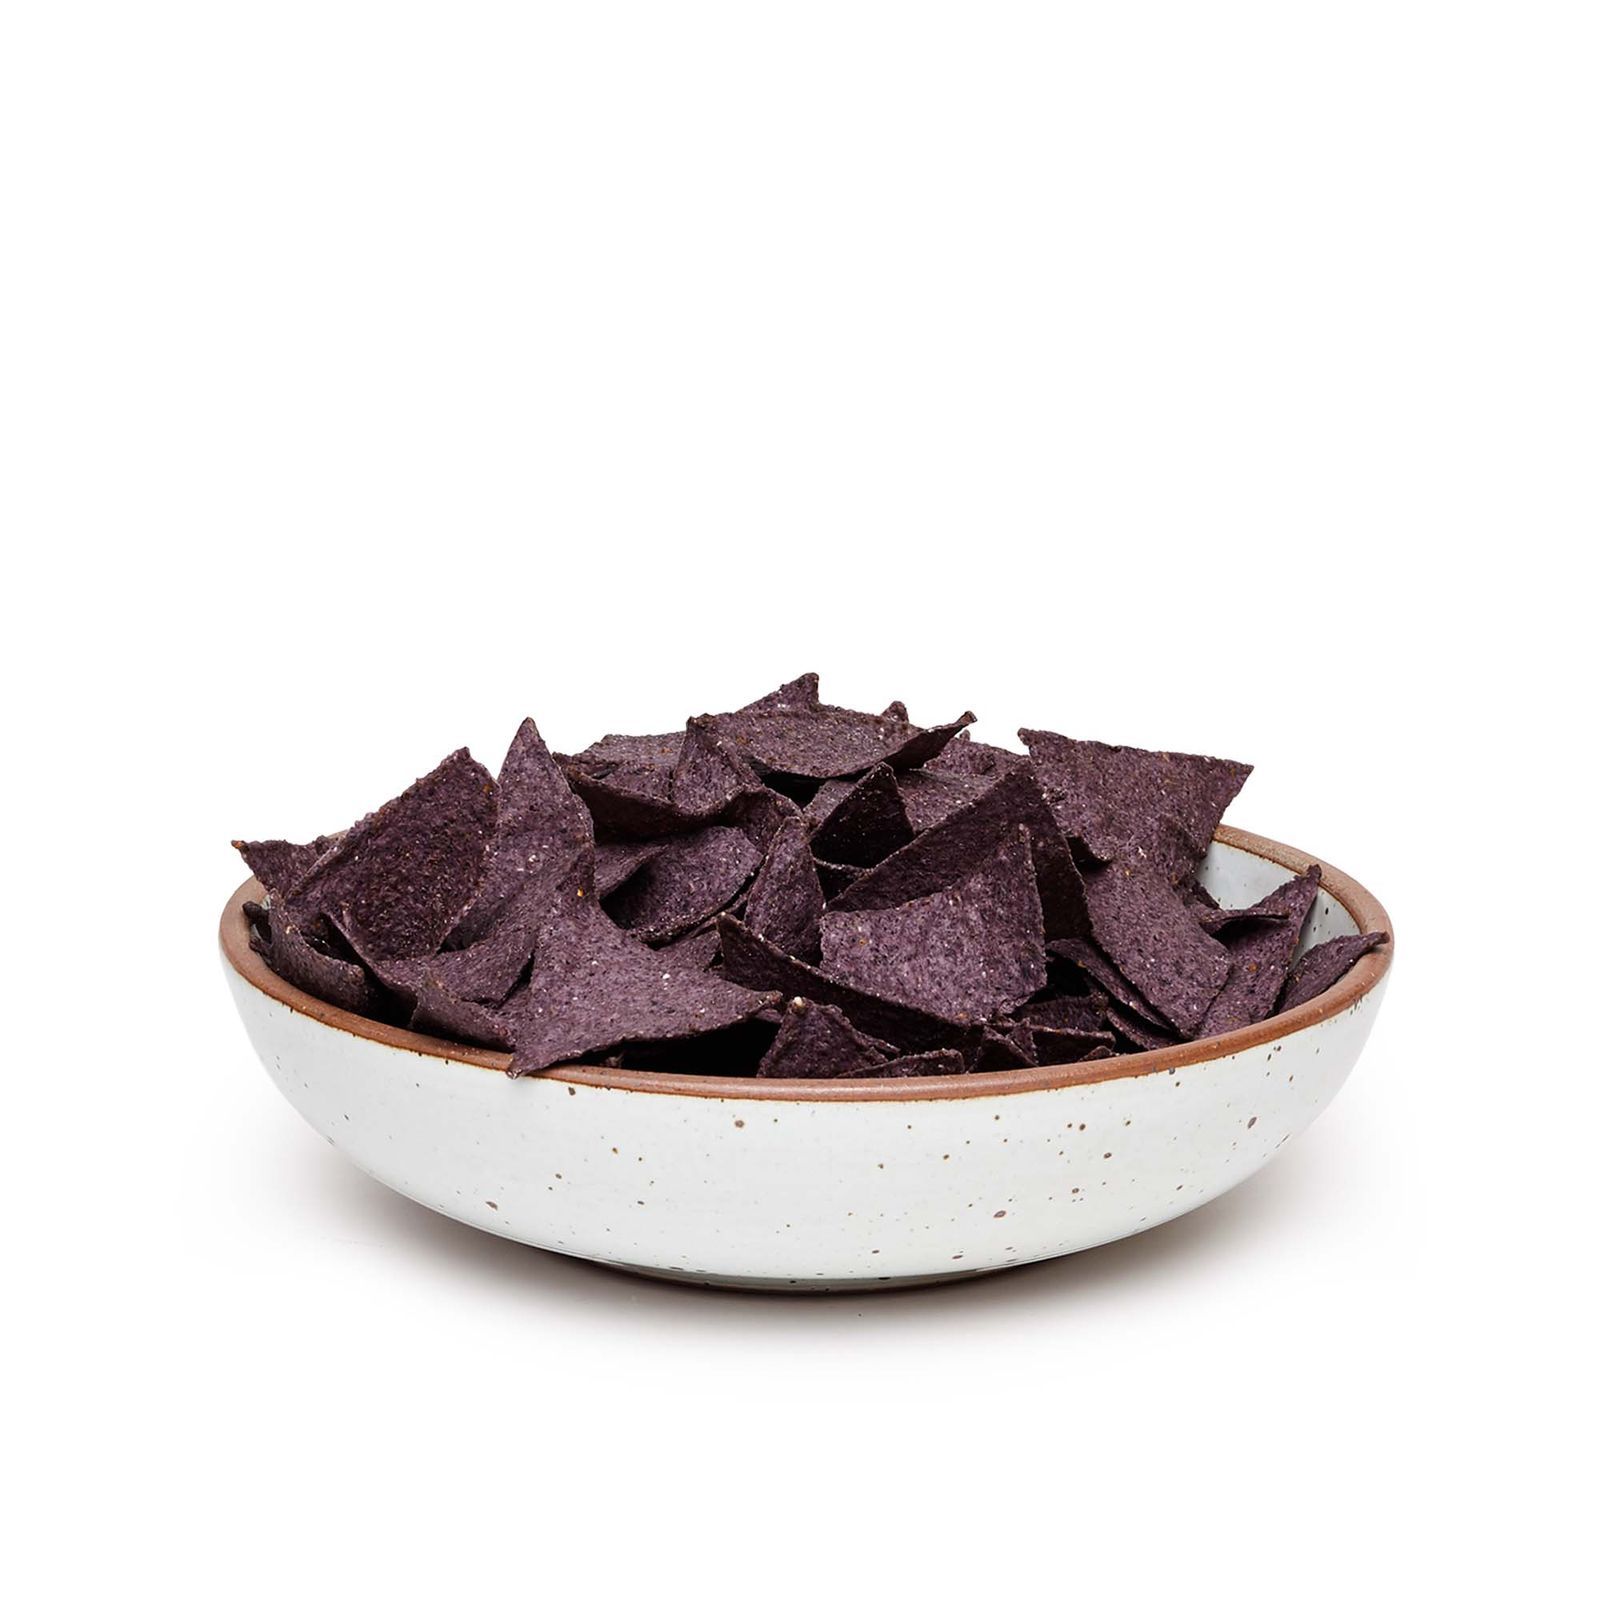 An eggshell-white colored shallow, but large, bowl, filled with a heaping party-sized serving of black tortilla chips.